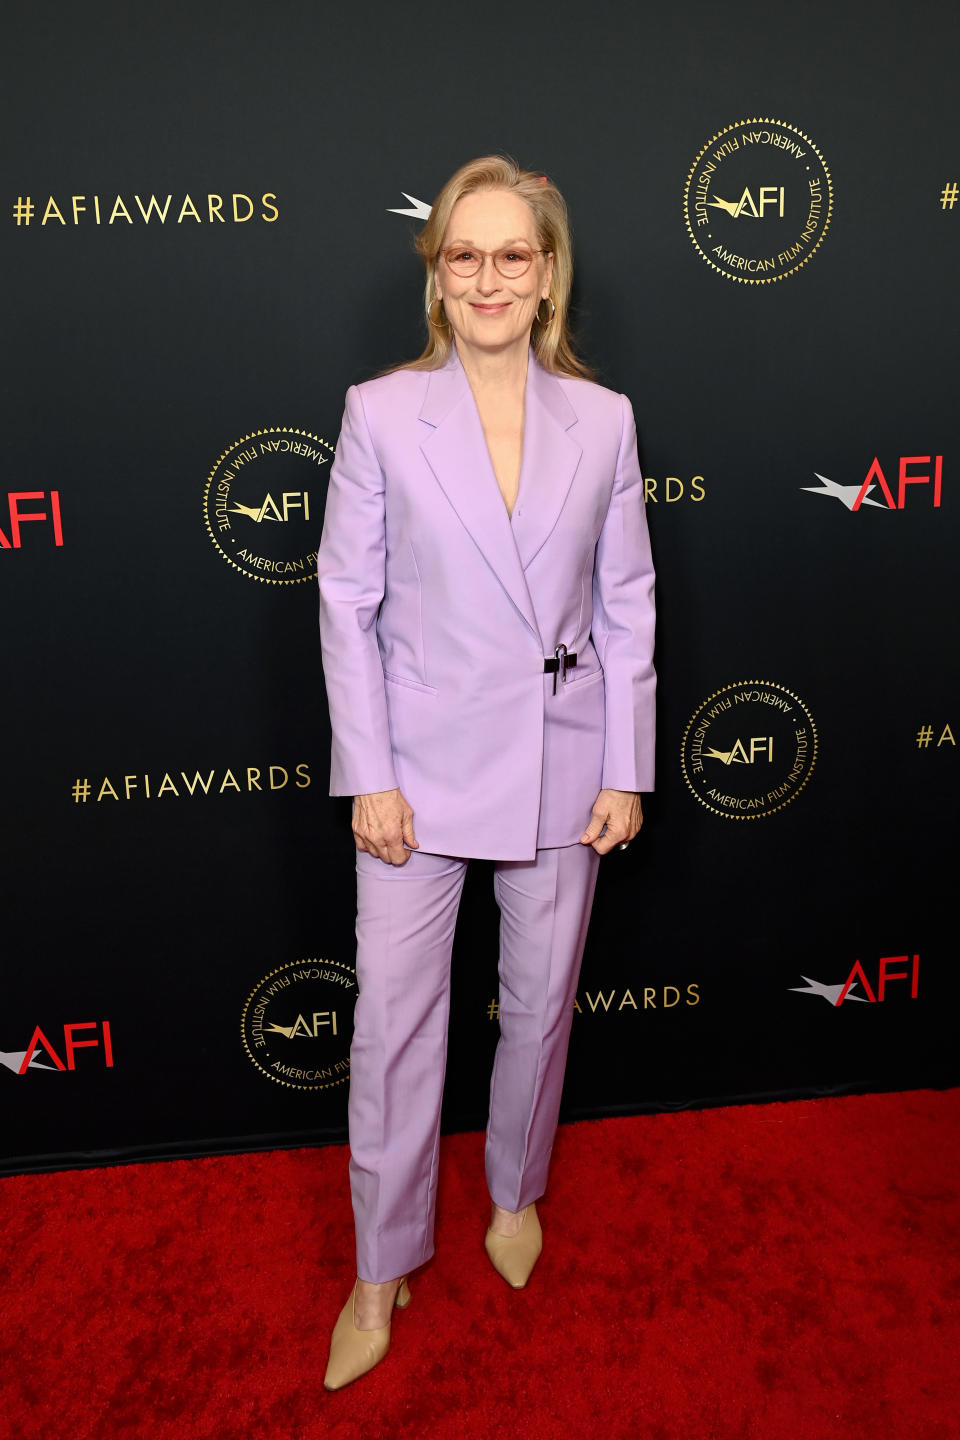 Meryl in a suit standing on the AFI Awards red carpet